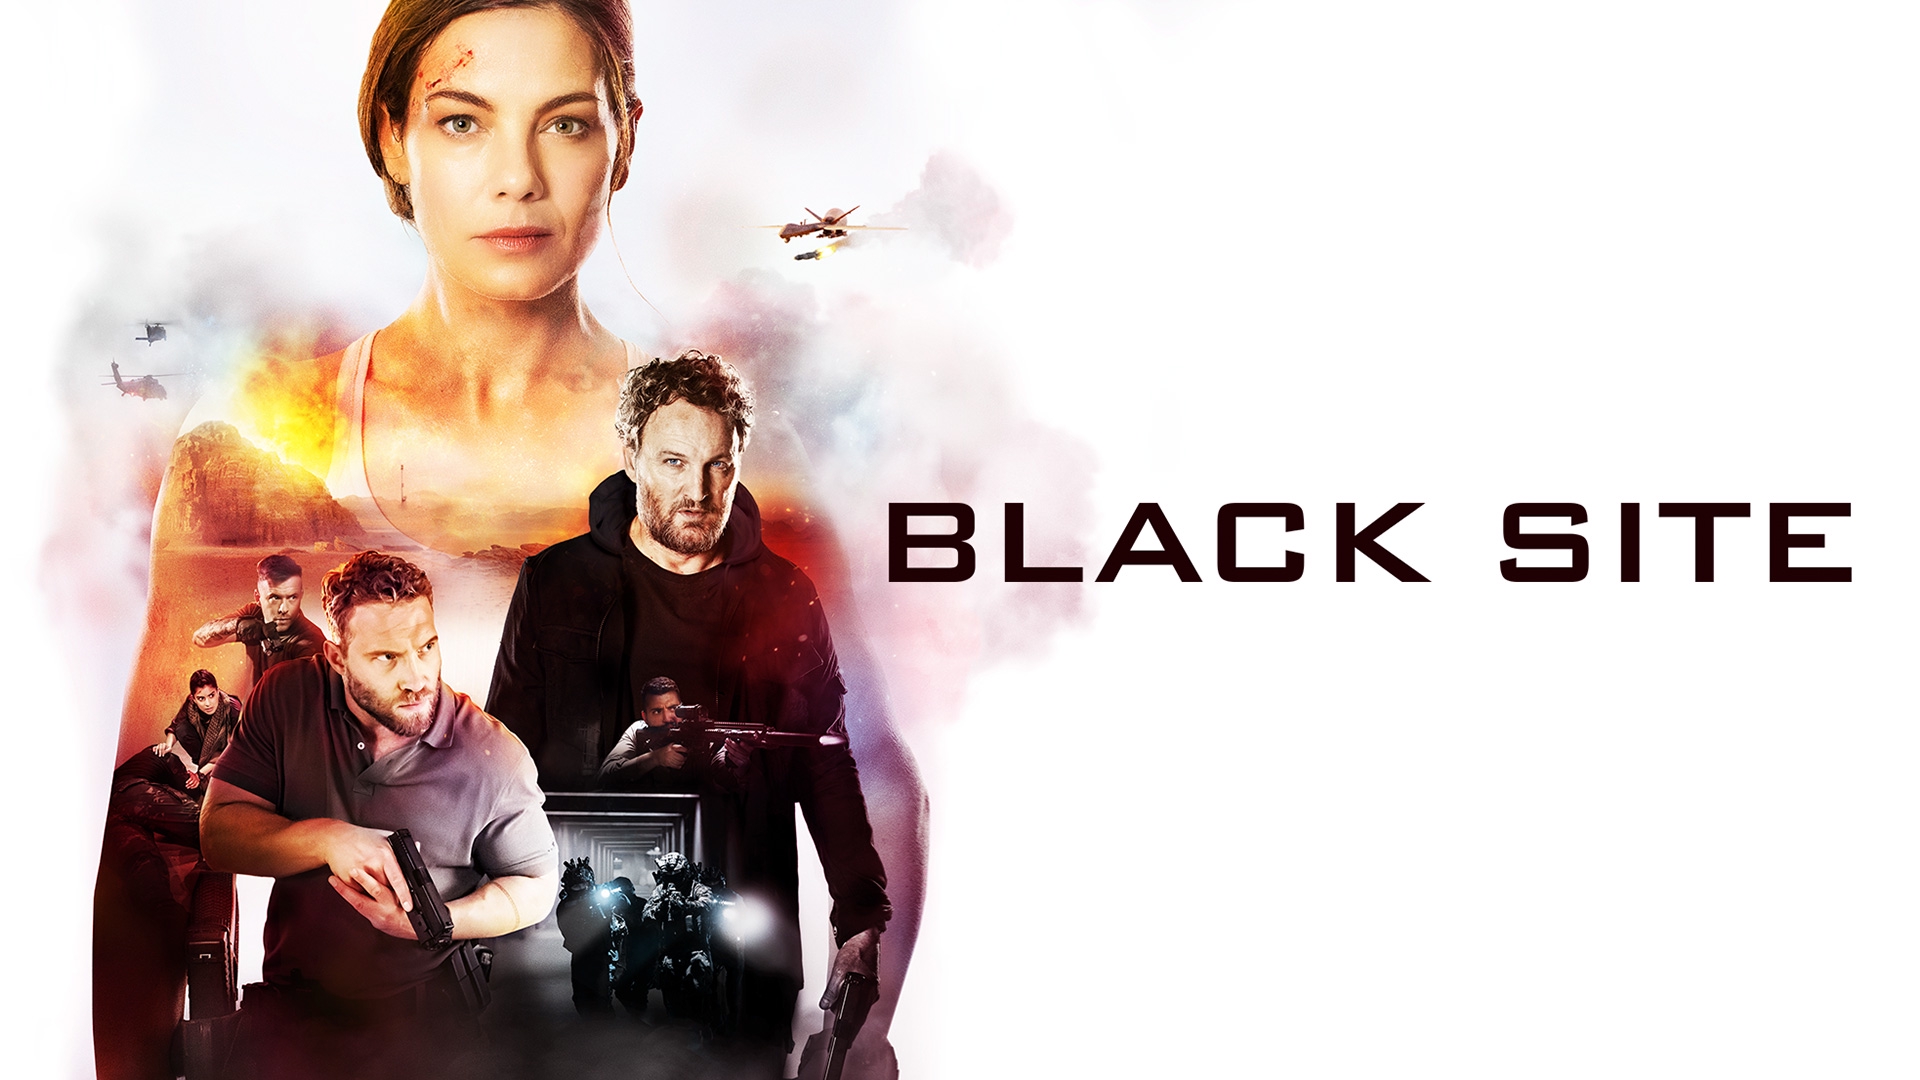 Black Site streaming: where to watch movie online?